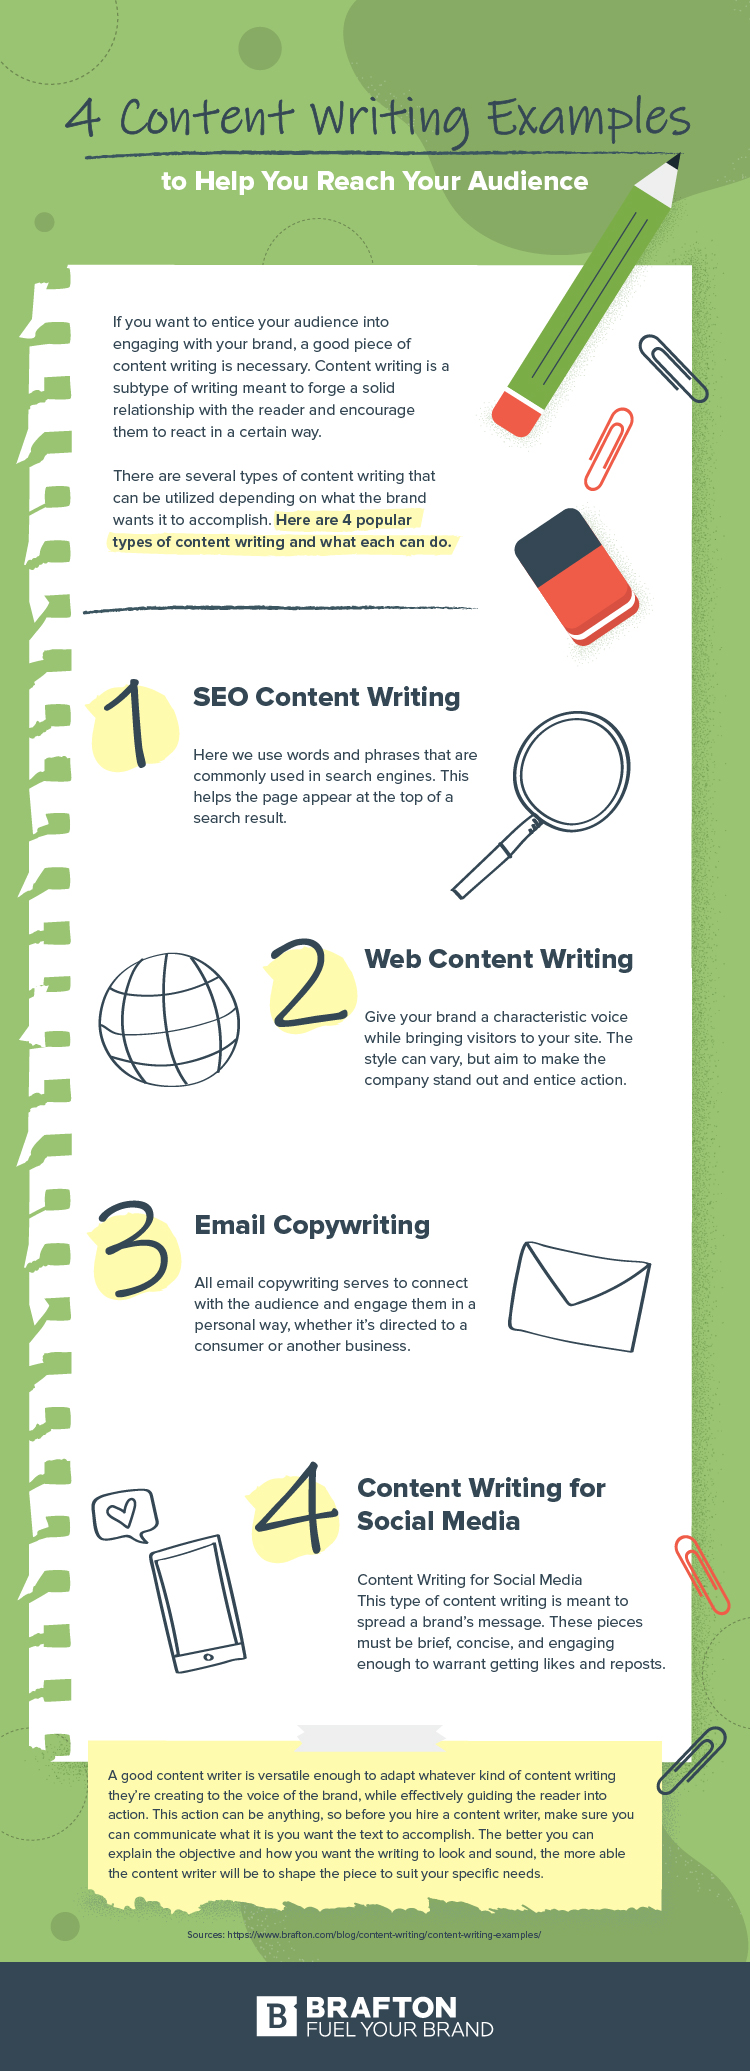 4 Content Writing Examples to Help You Reach Your Audience infographic